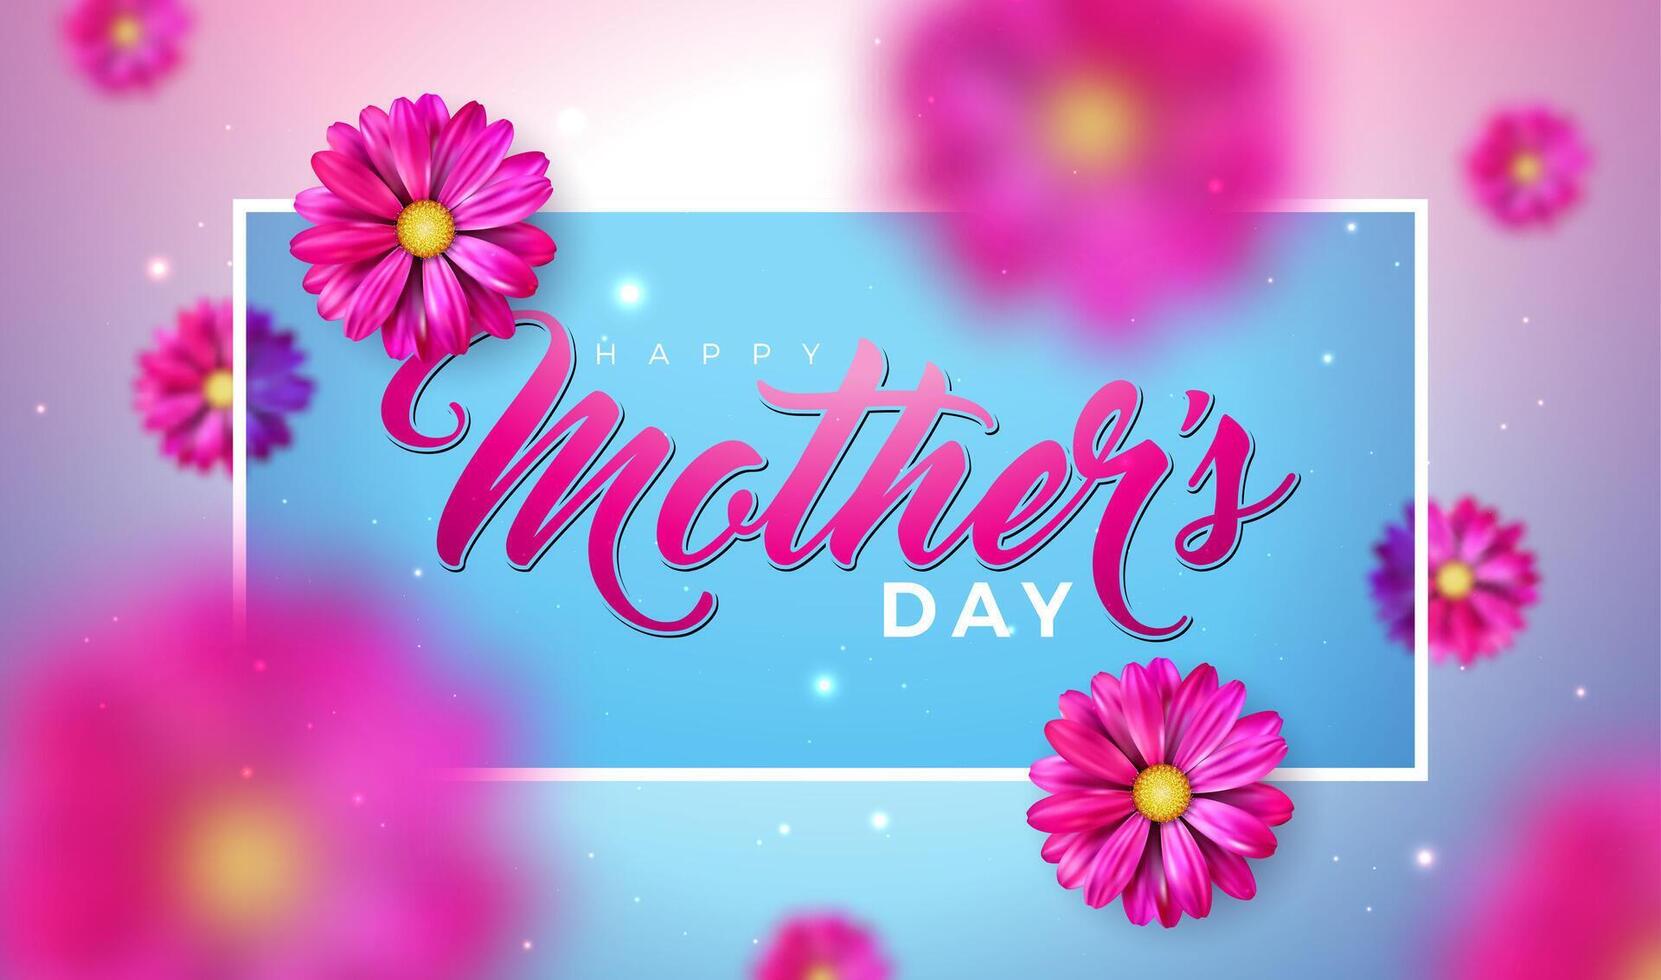 Happy Mother's Day Greeting Card Design with Falling Flower and Typography Letter on Pink Background. Vector Celebration Illustration Template for Banner, Flyer, Invitation, Brochure, Poster.